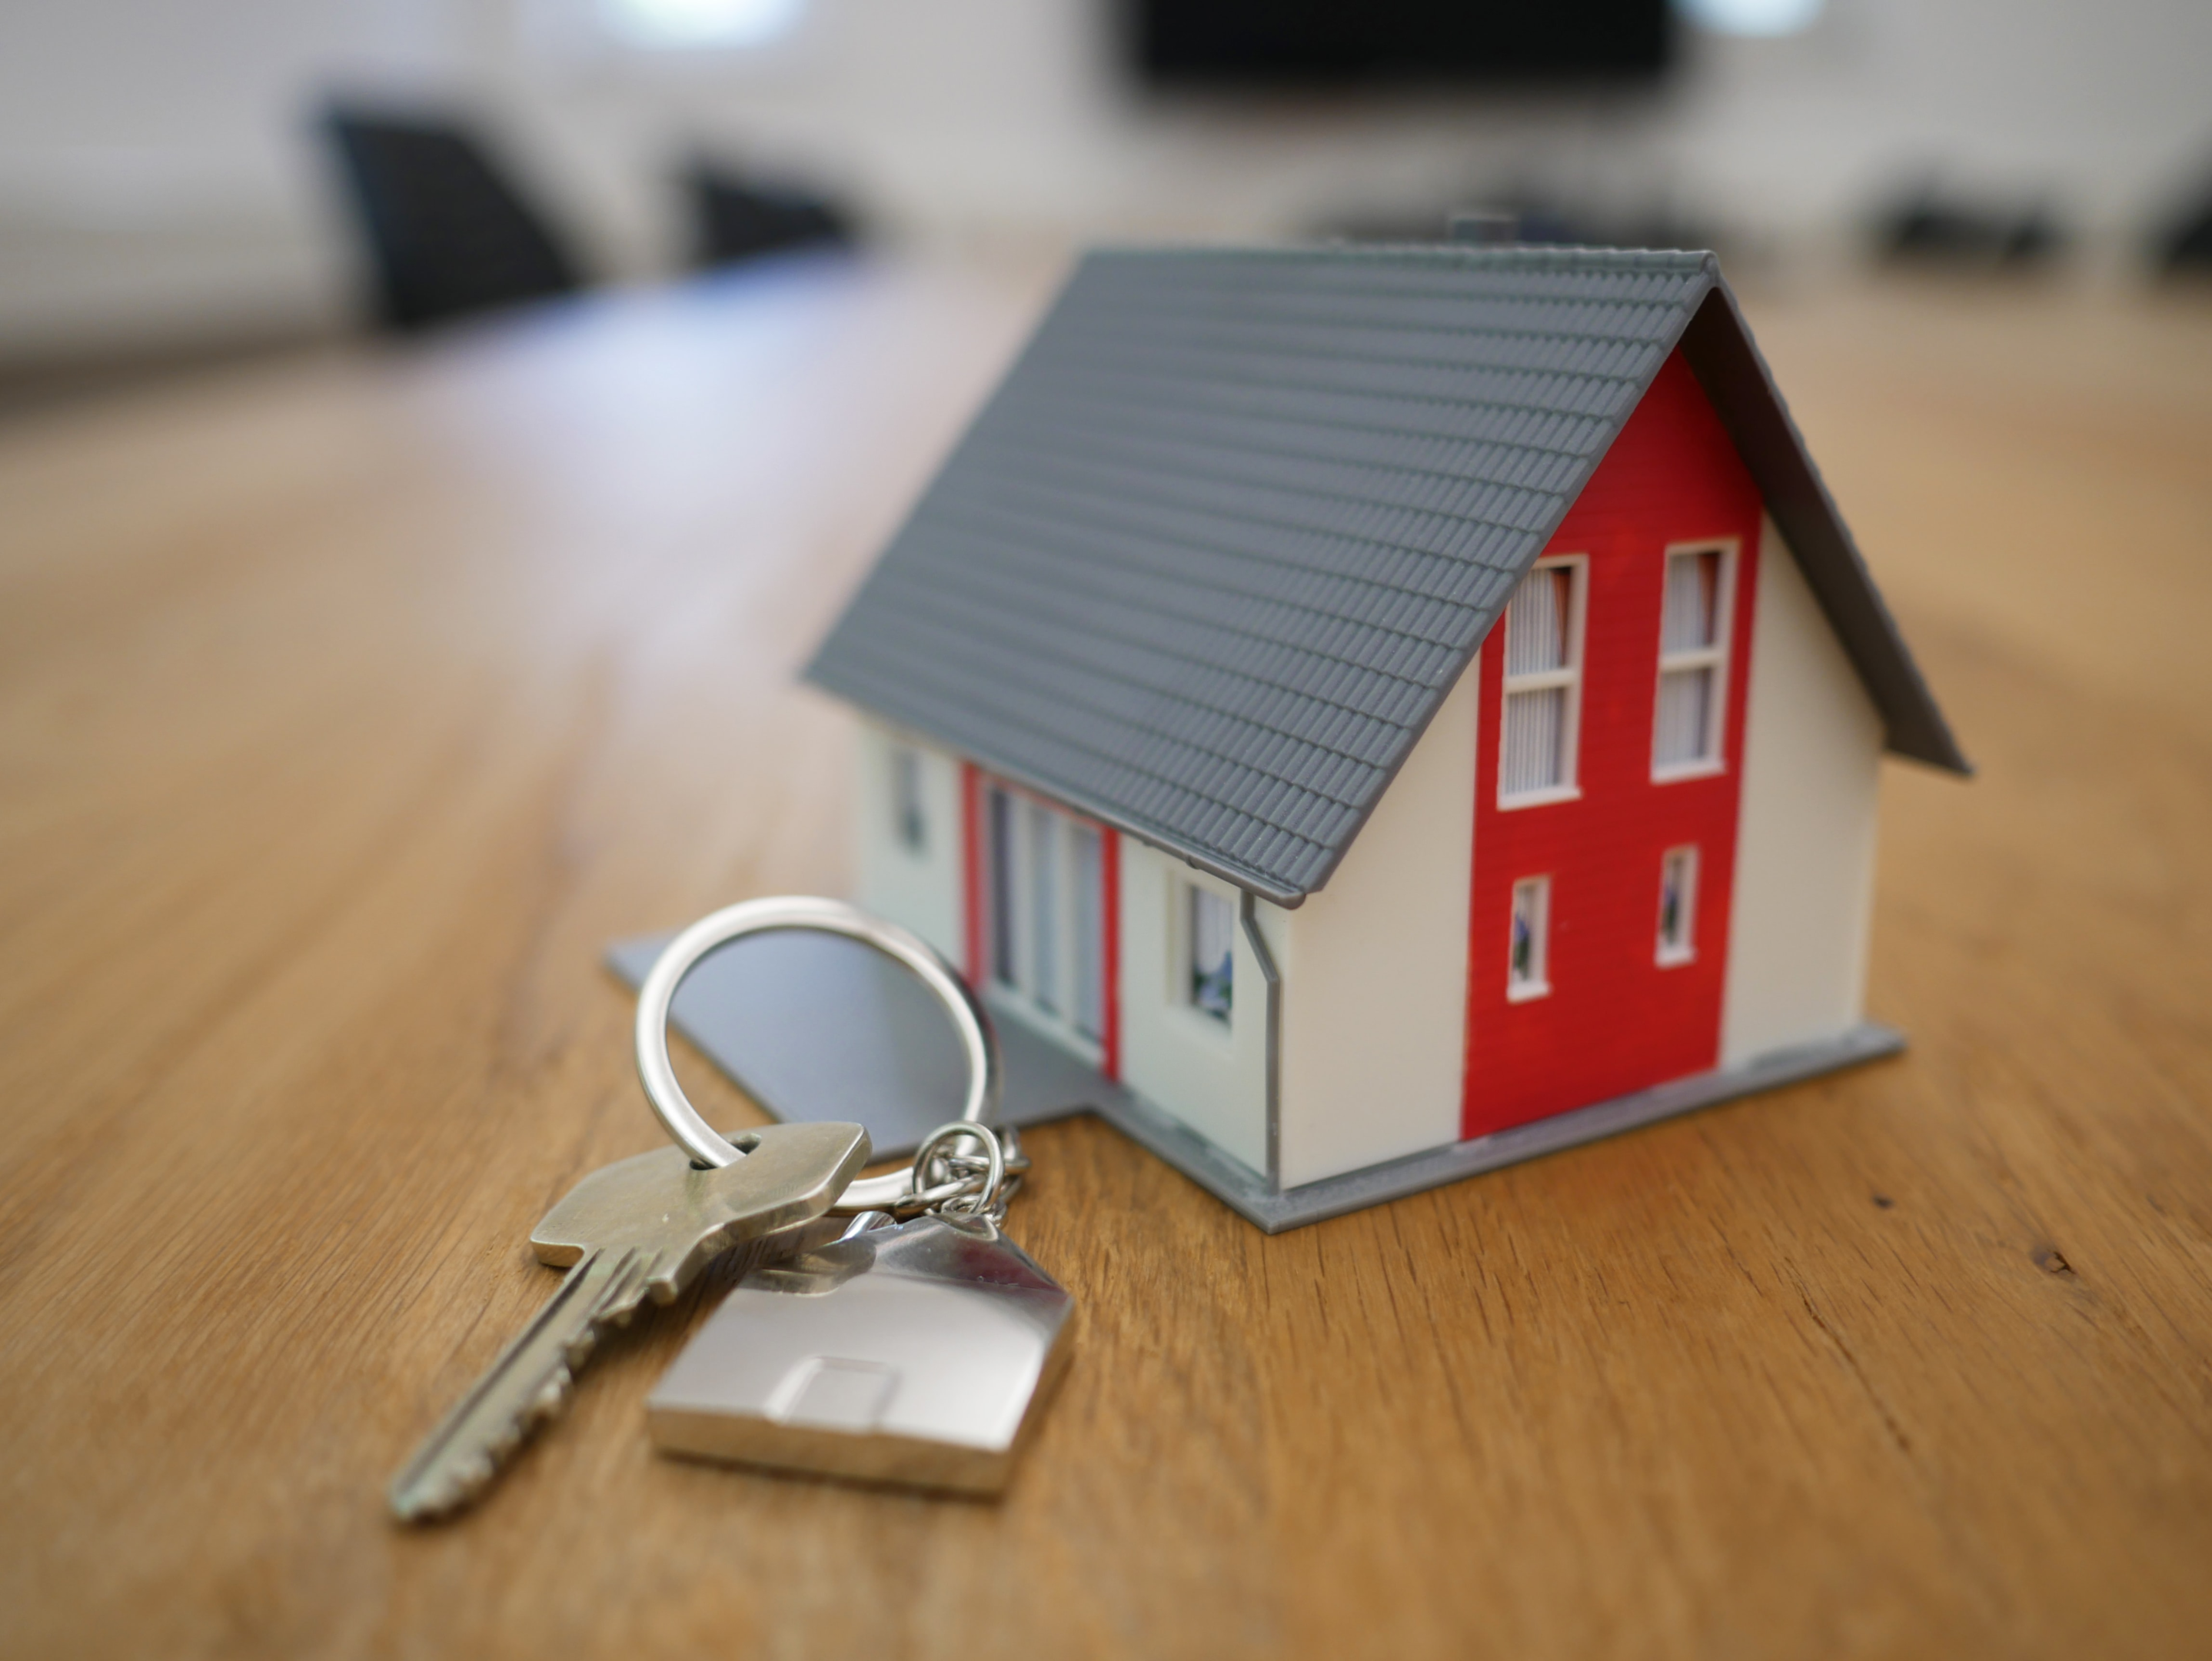 OpenDoor helps home buyers and sellers navigate the process of buying and selling a home.